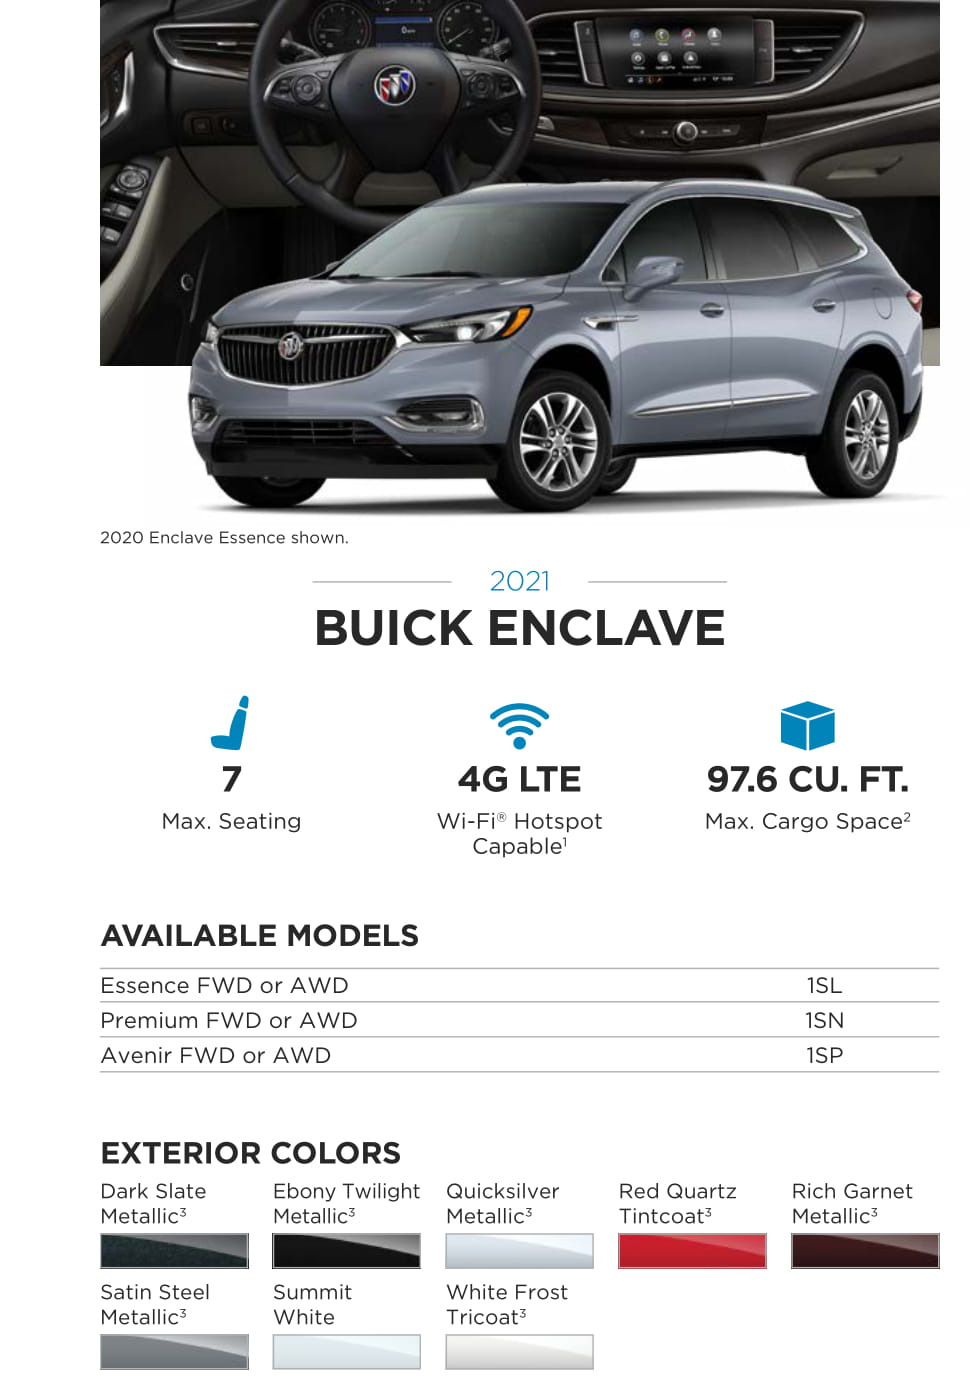 Exterior Colors used on this model Buick in 2021